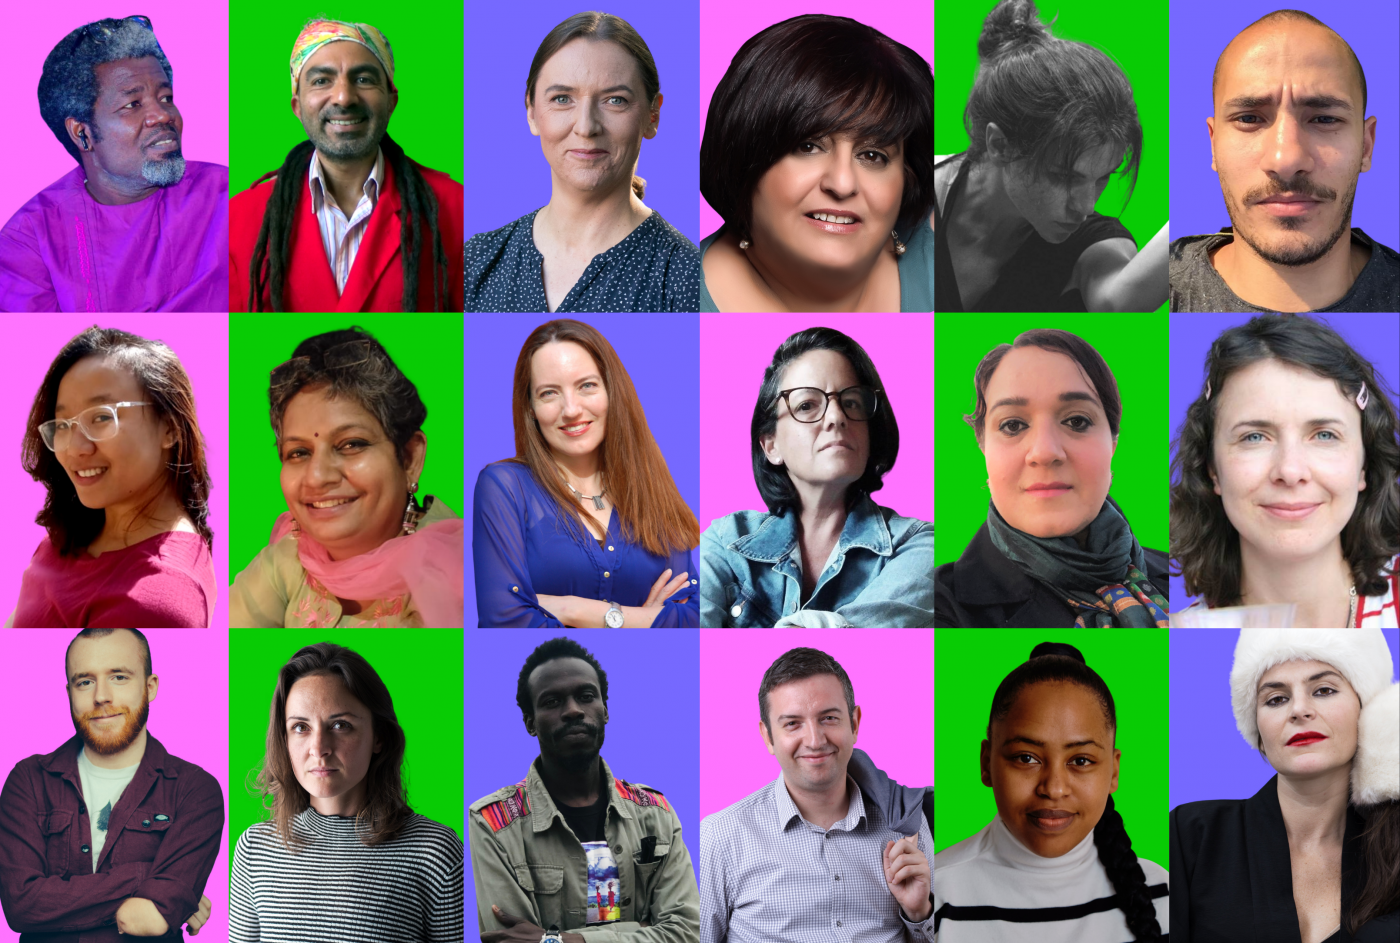 Collage of Global Connectors profile pictures on colourful backgrounds (pink, green and purple)